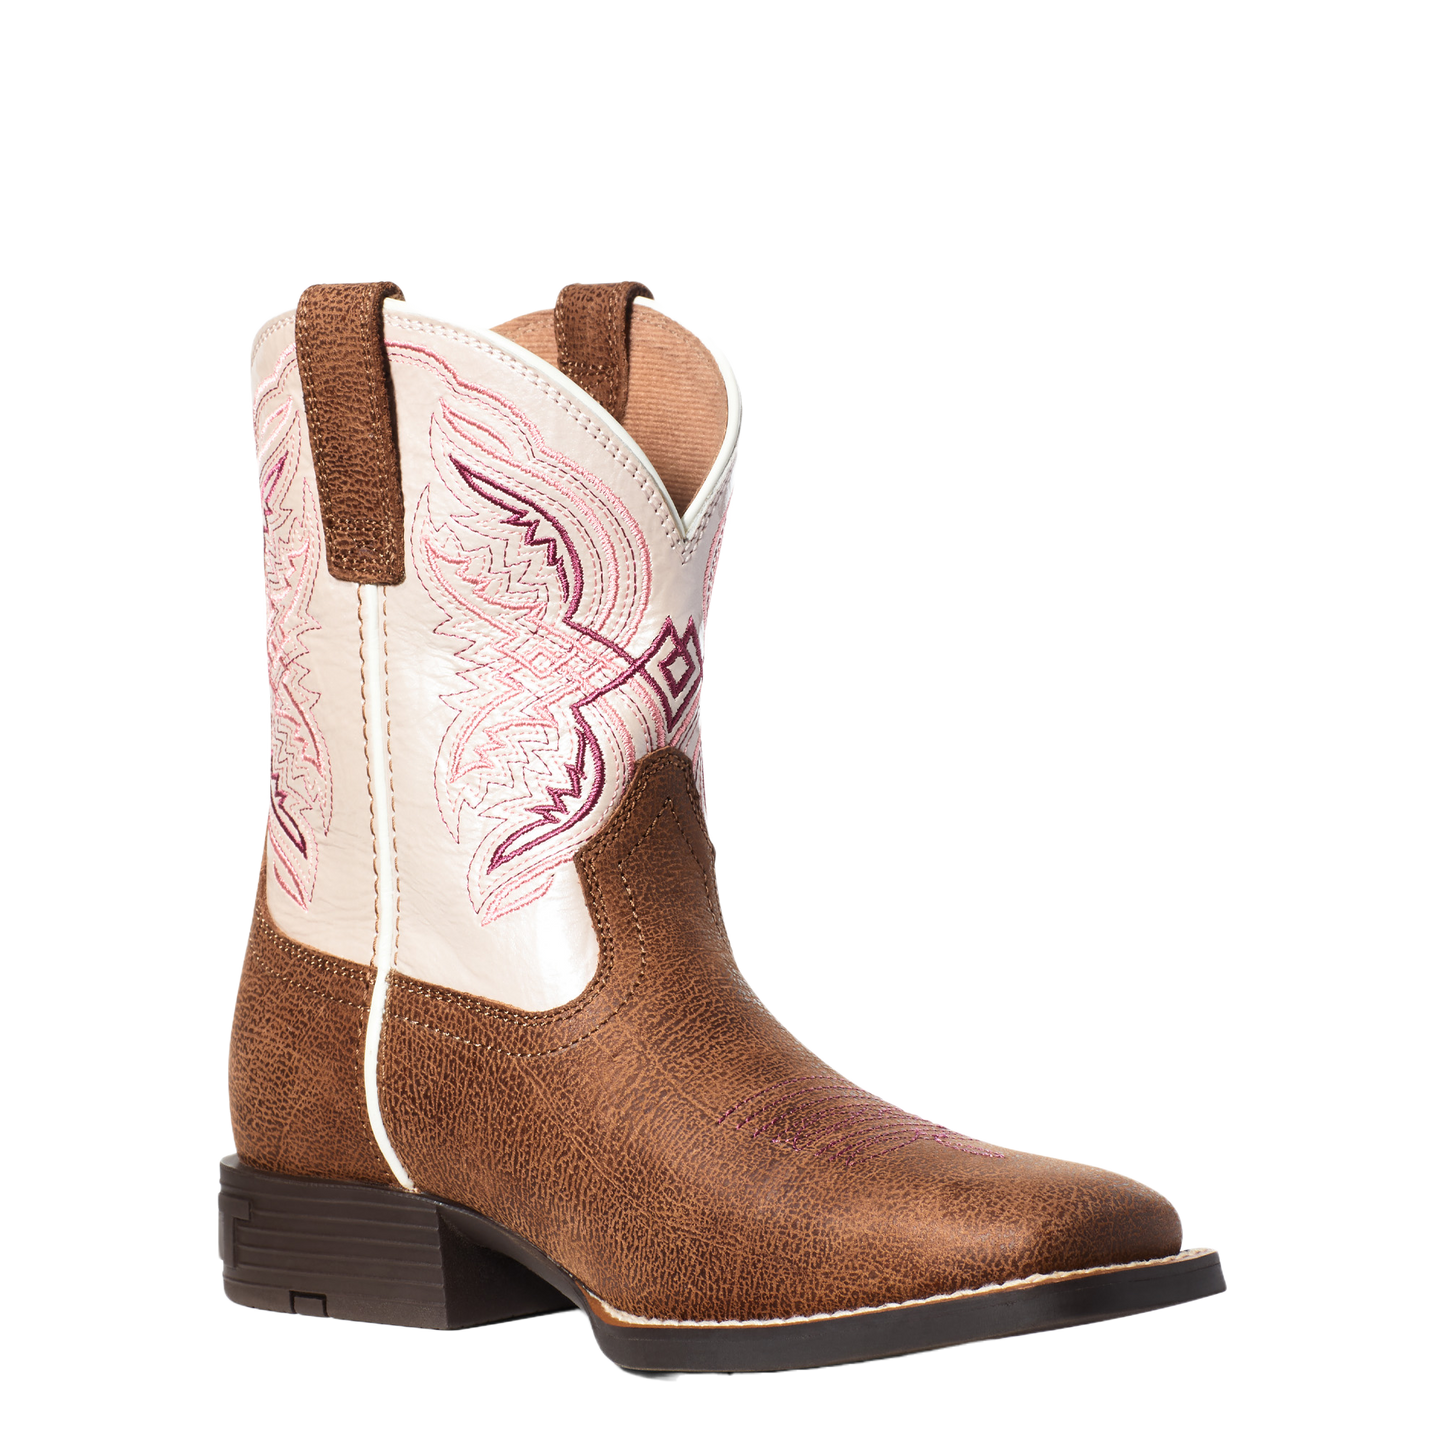 Ariat Youth Girl's Double Kicker Adobe Tan an Pink Boots 10036849